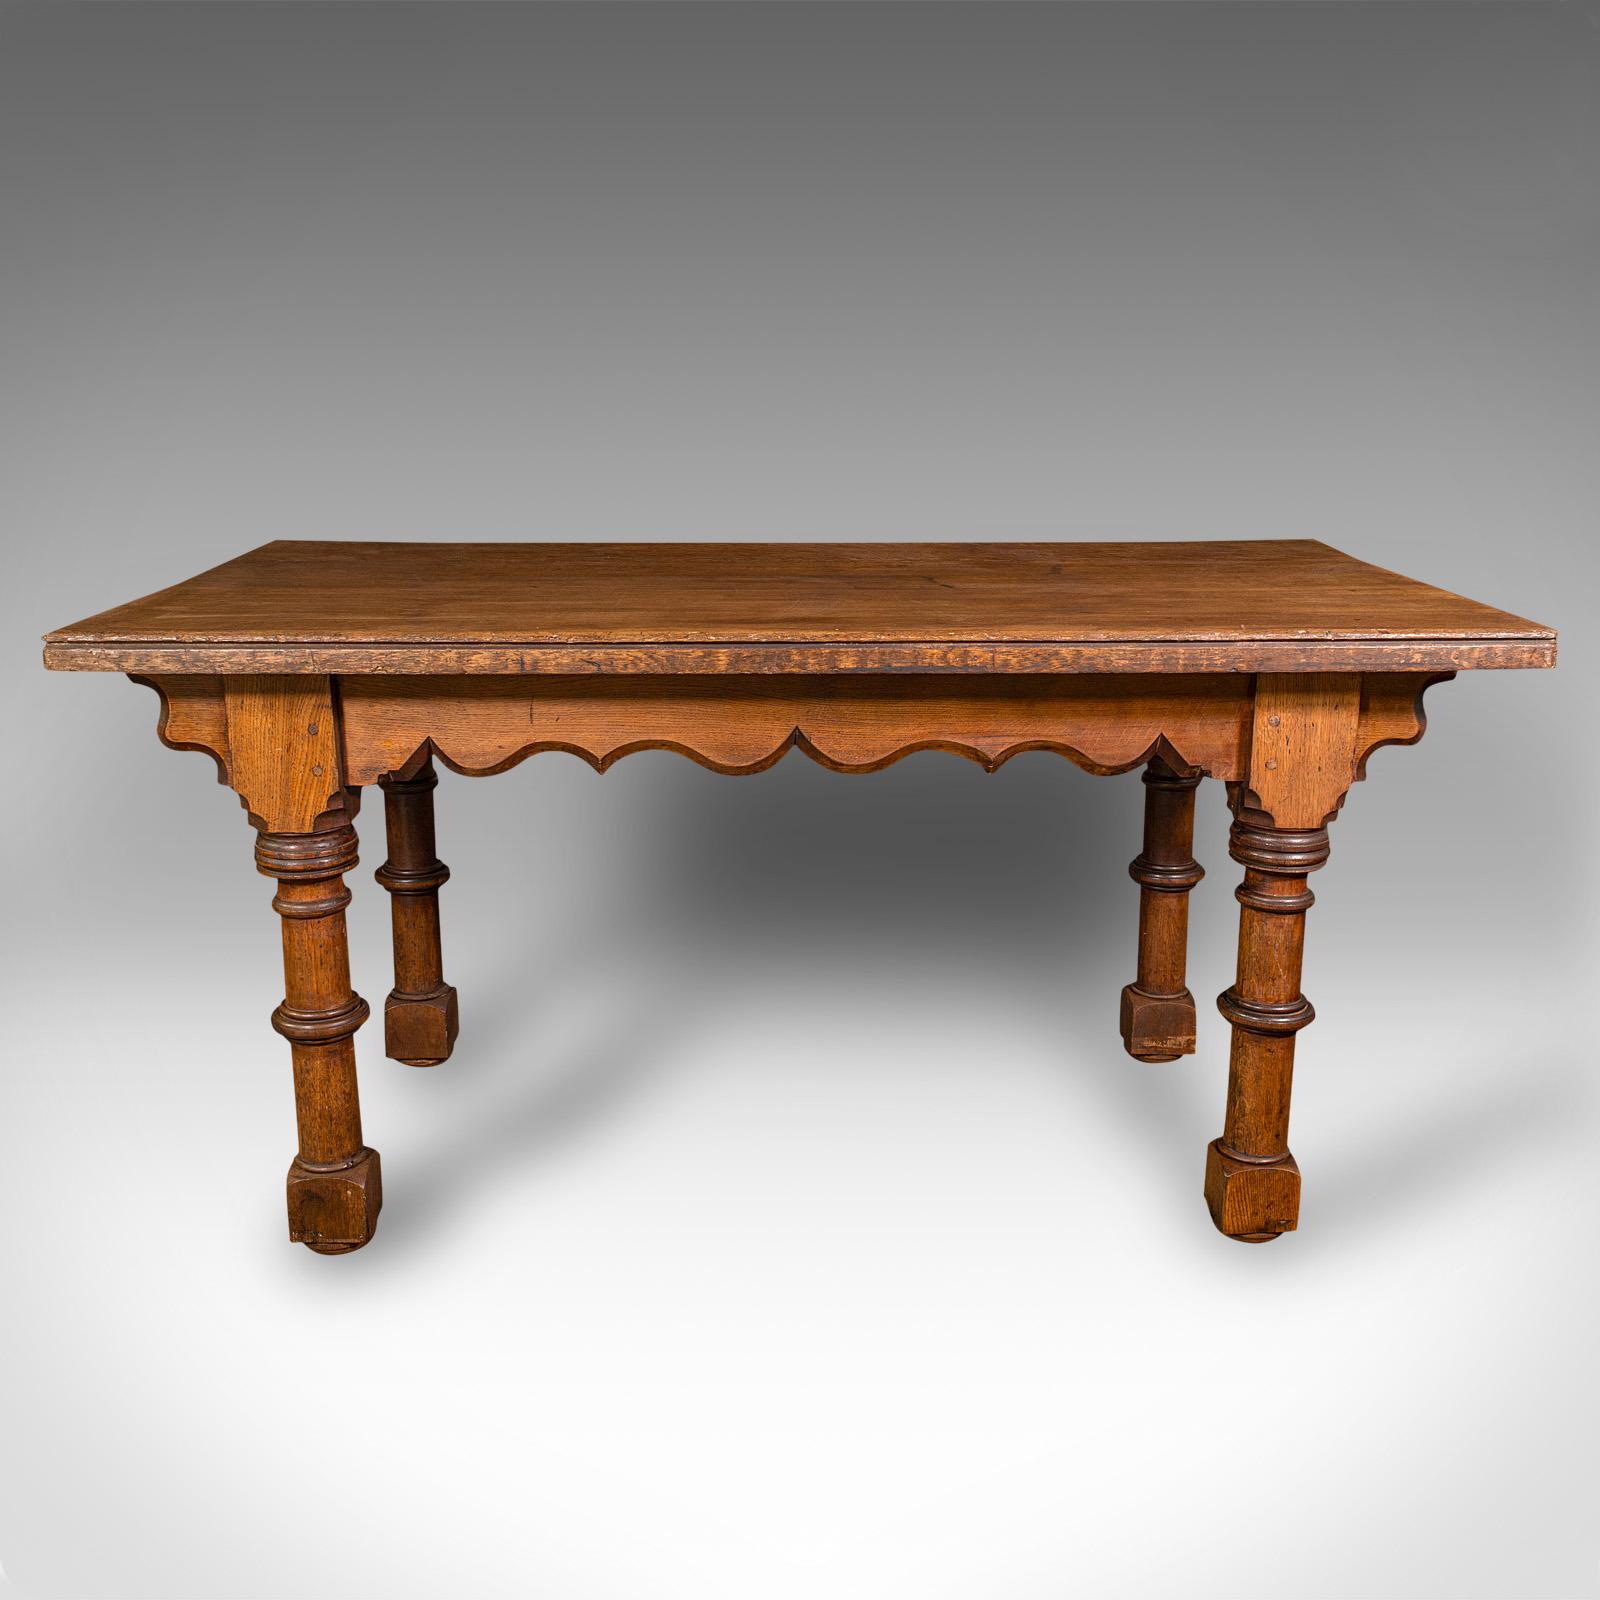 This is an antique kitchen dining table. A Scottish, oak 4-6 seat table with Gothic revival taste, dating to the Victorian period, circa 1870.

Wonderfully solid and characterful with superb figuring and a great dining height of 83cm